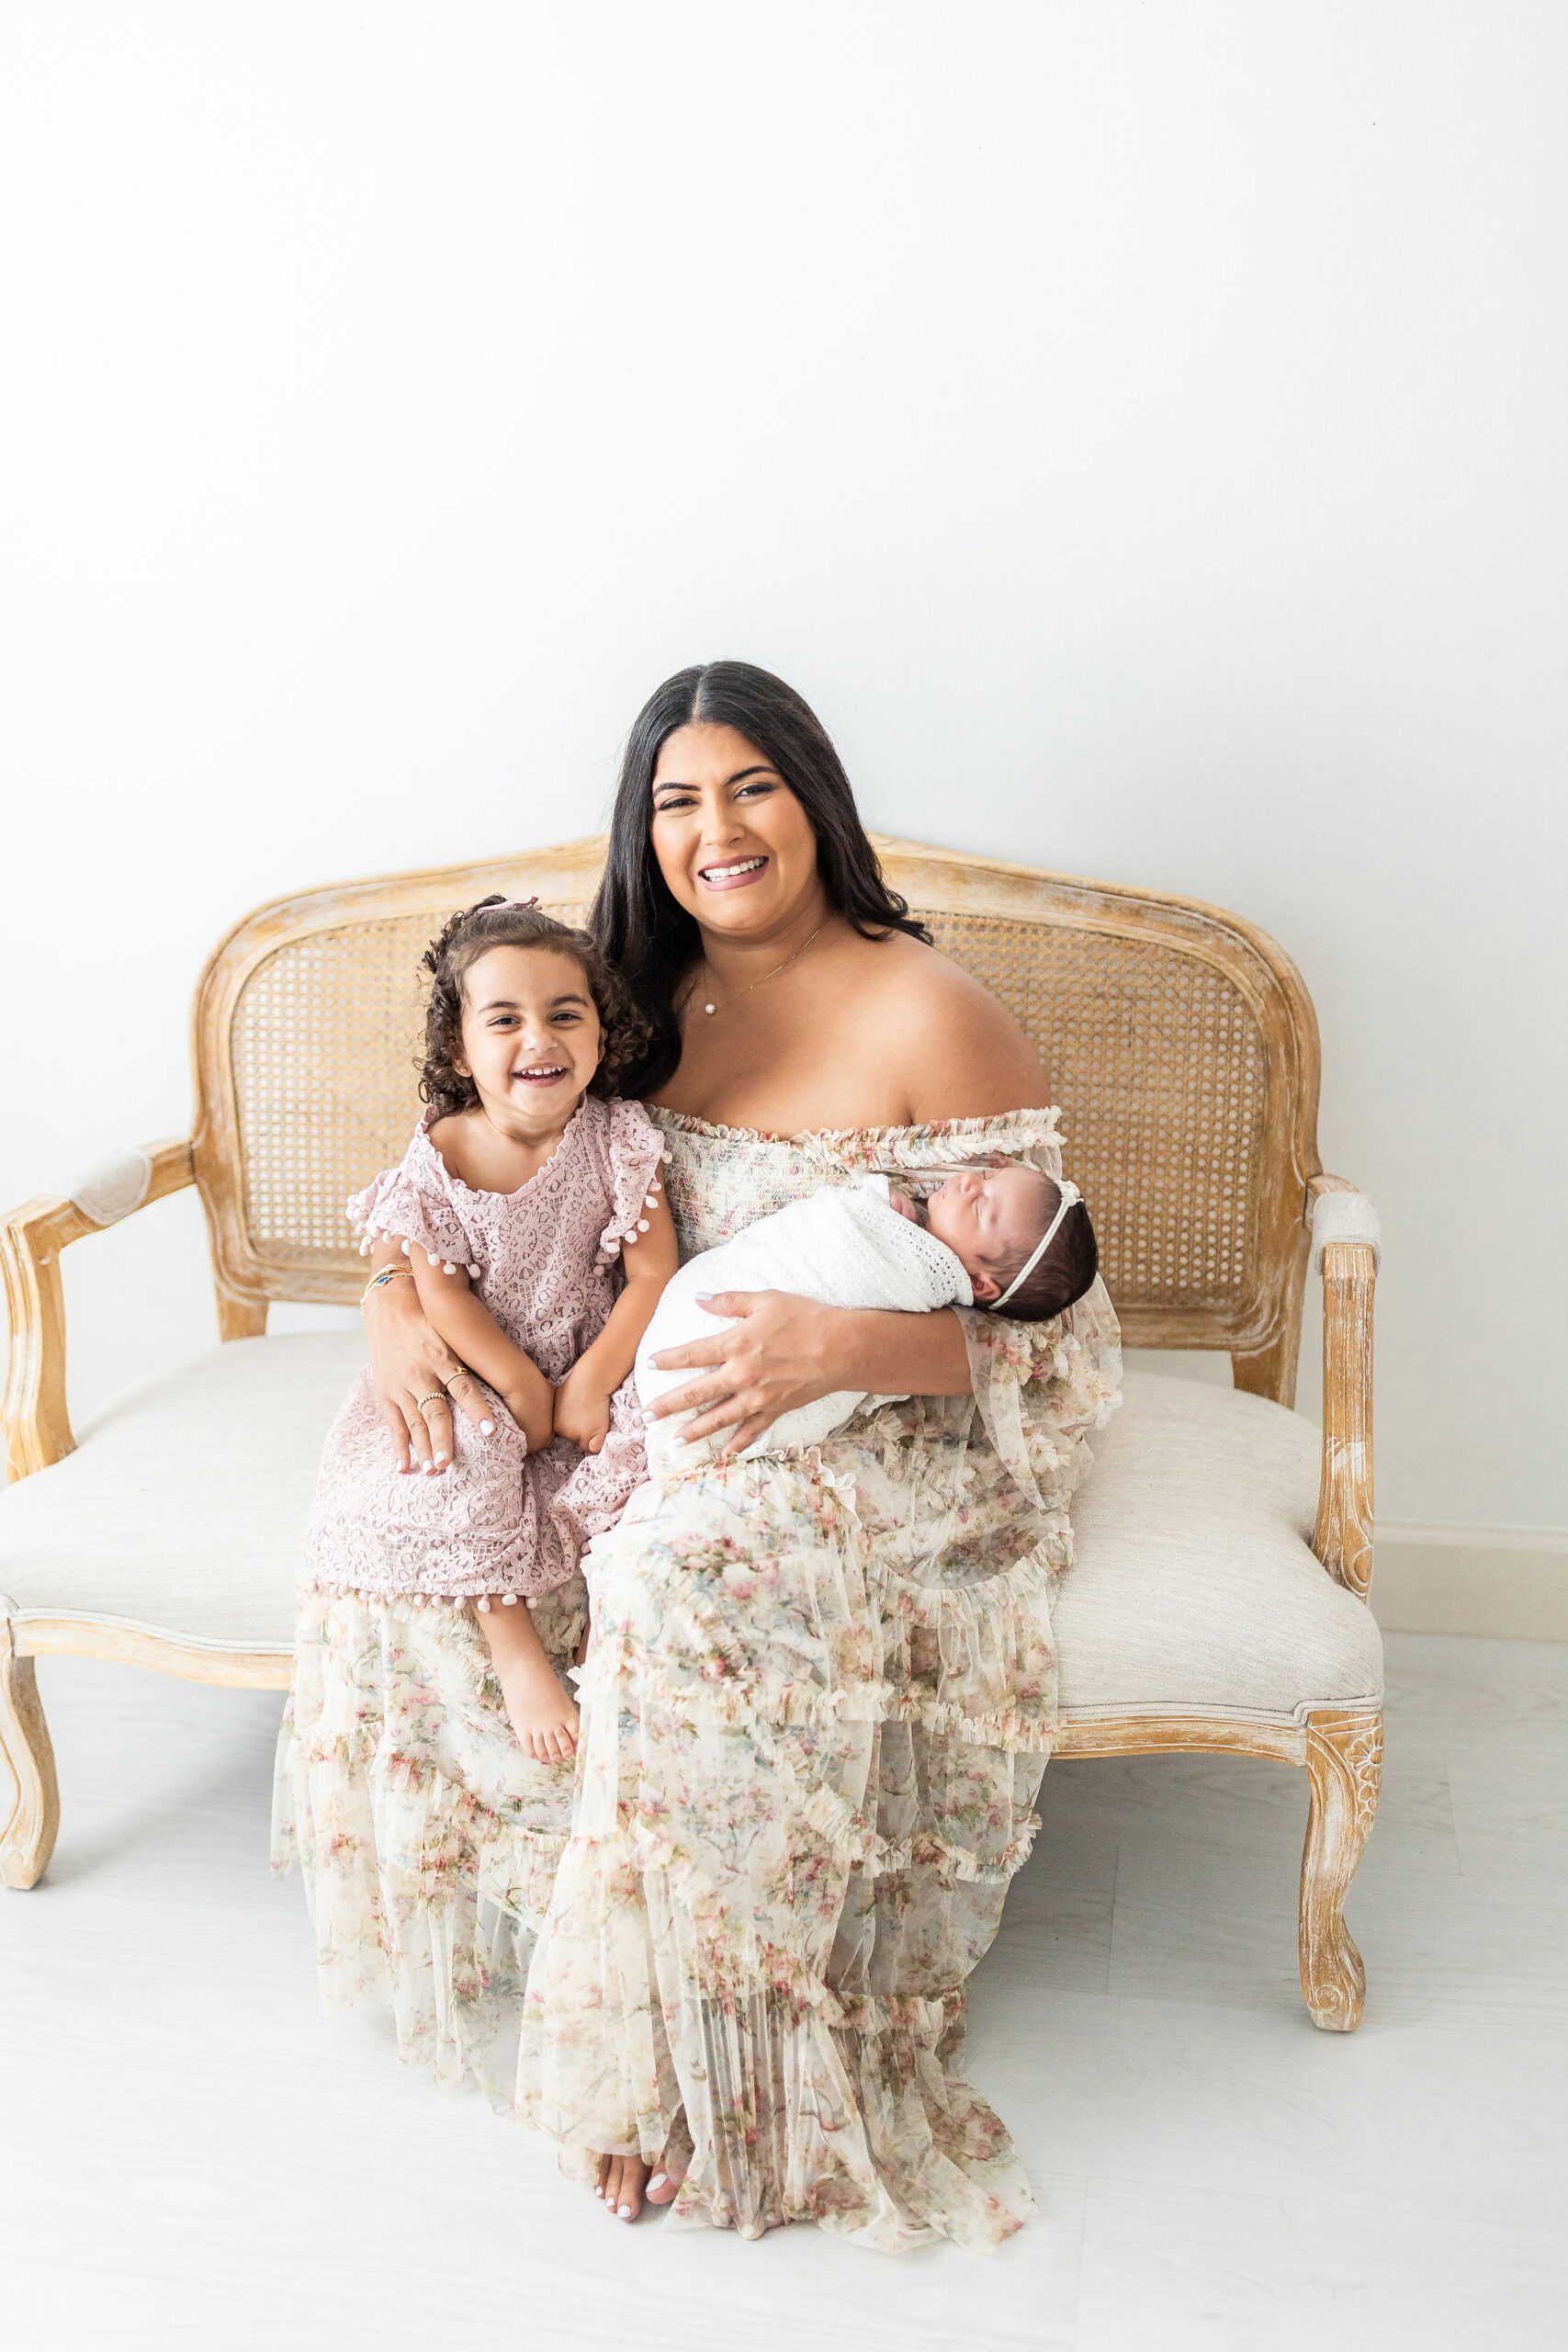 A happy mom sits on a bench in a studio with her toddler daughter on one leg and her newborn baby sleeping in her other arm after meeting mamalactea